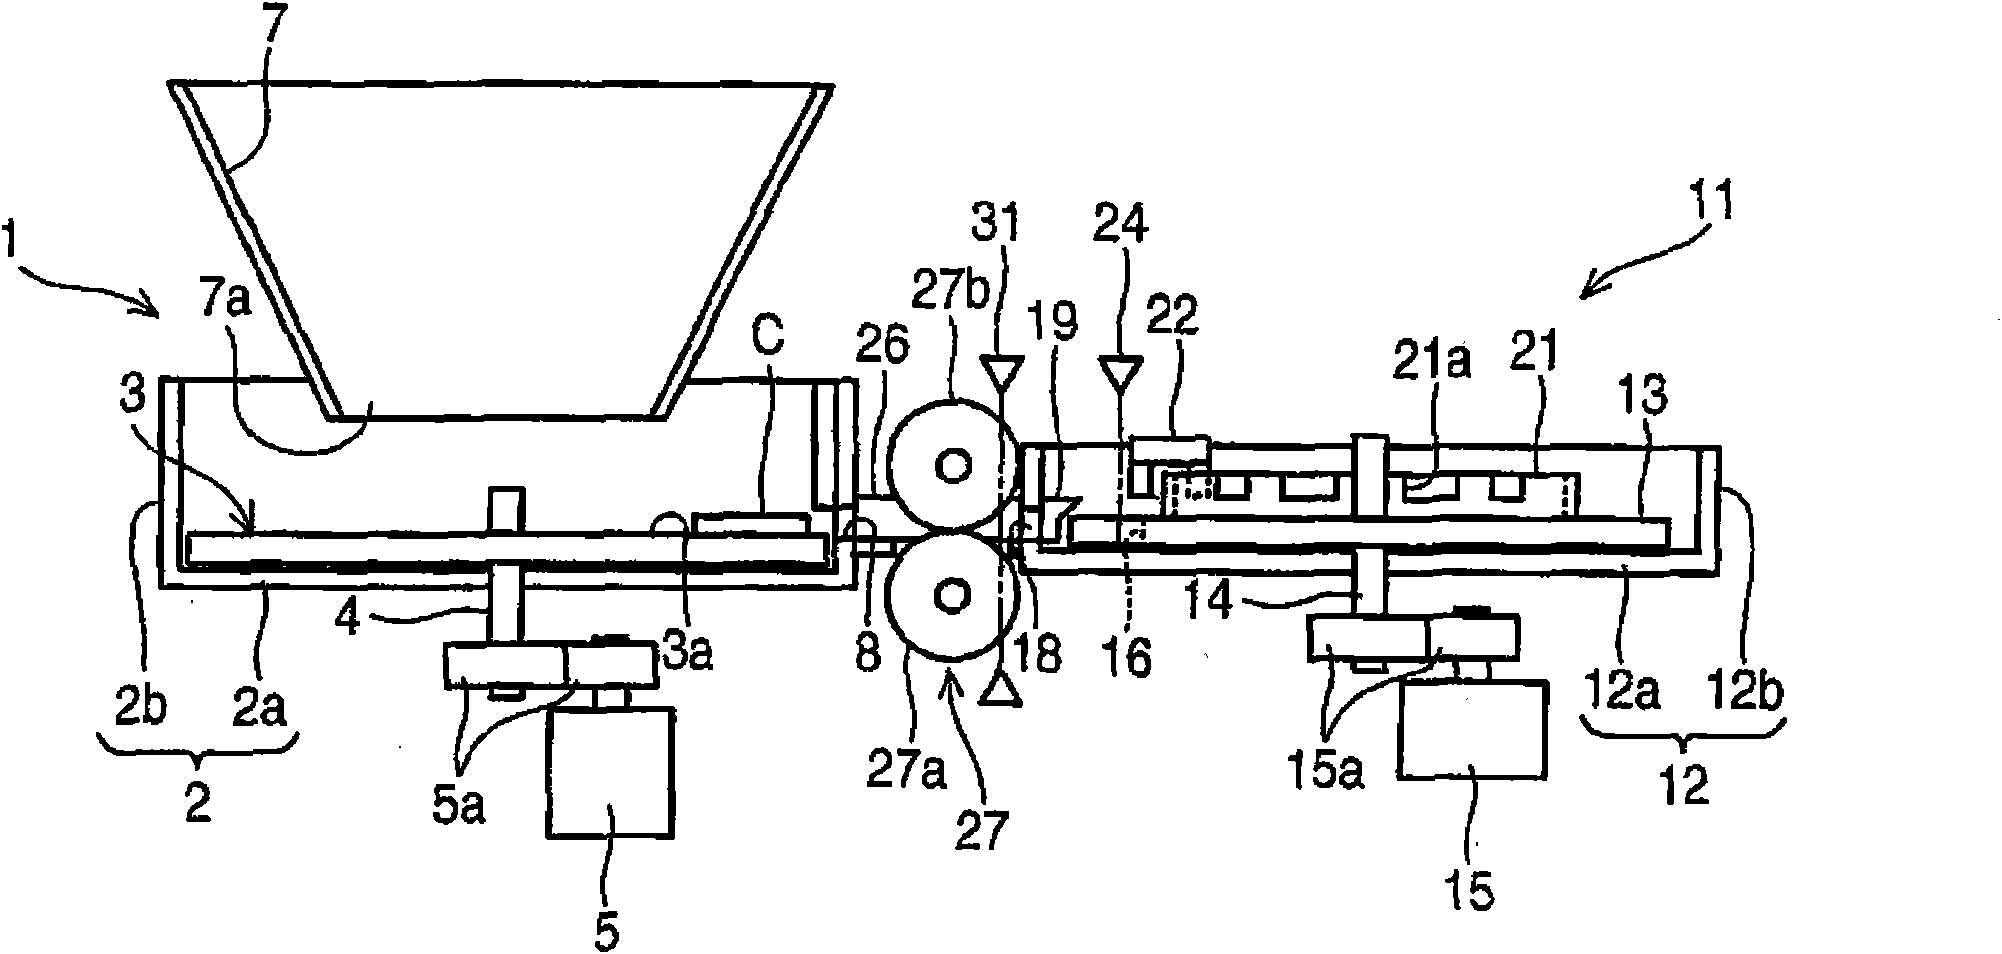 Coin processing device